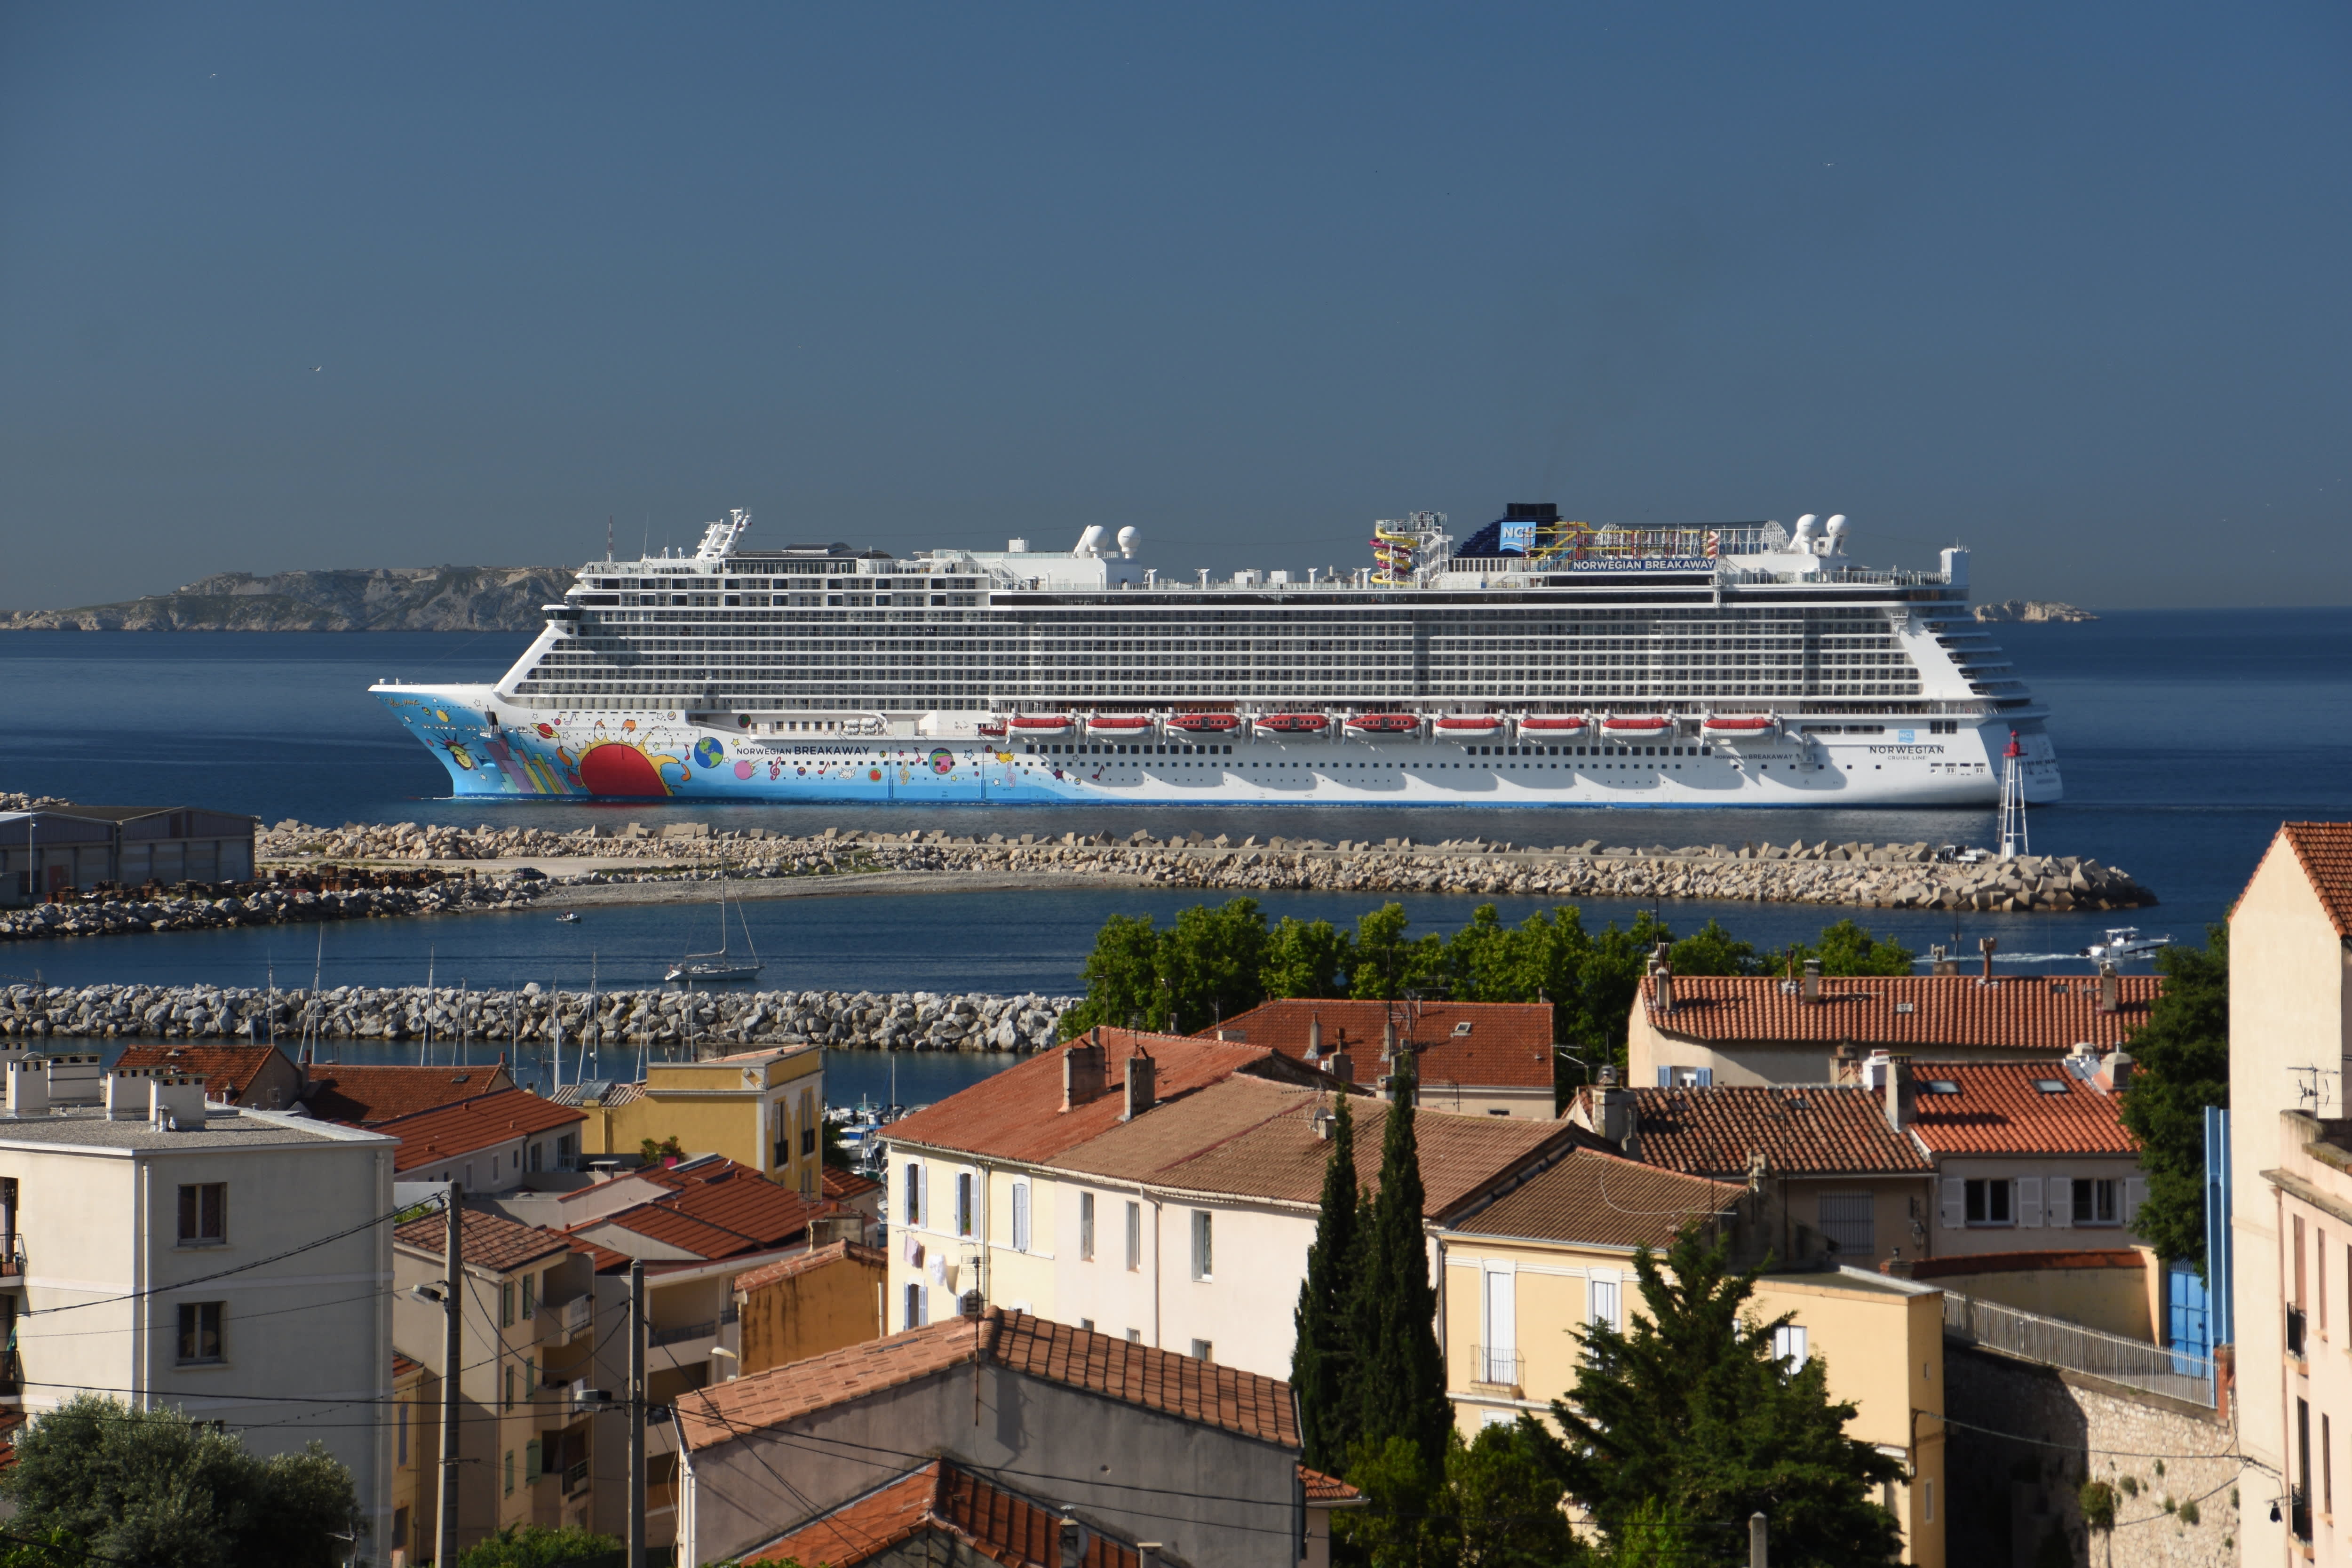 Norwegian Cruise Line CEO says U.S. ships are unlikely to sail this summer, calls CDC guidance 'unfair'